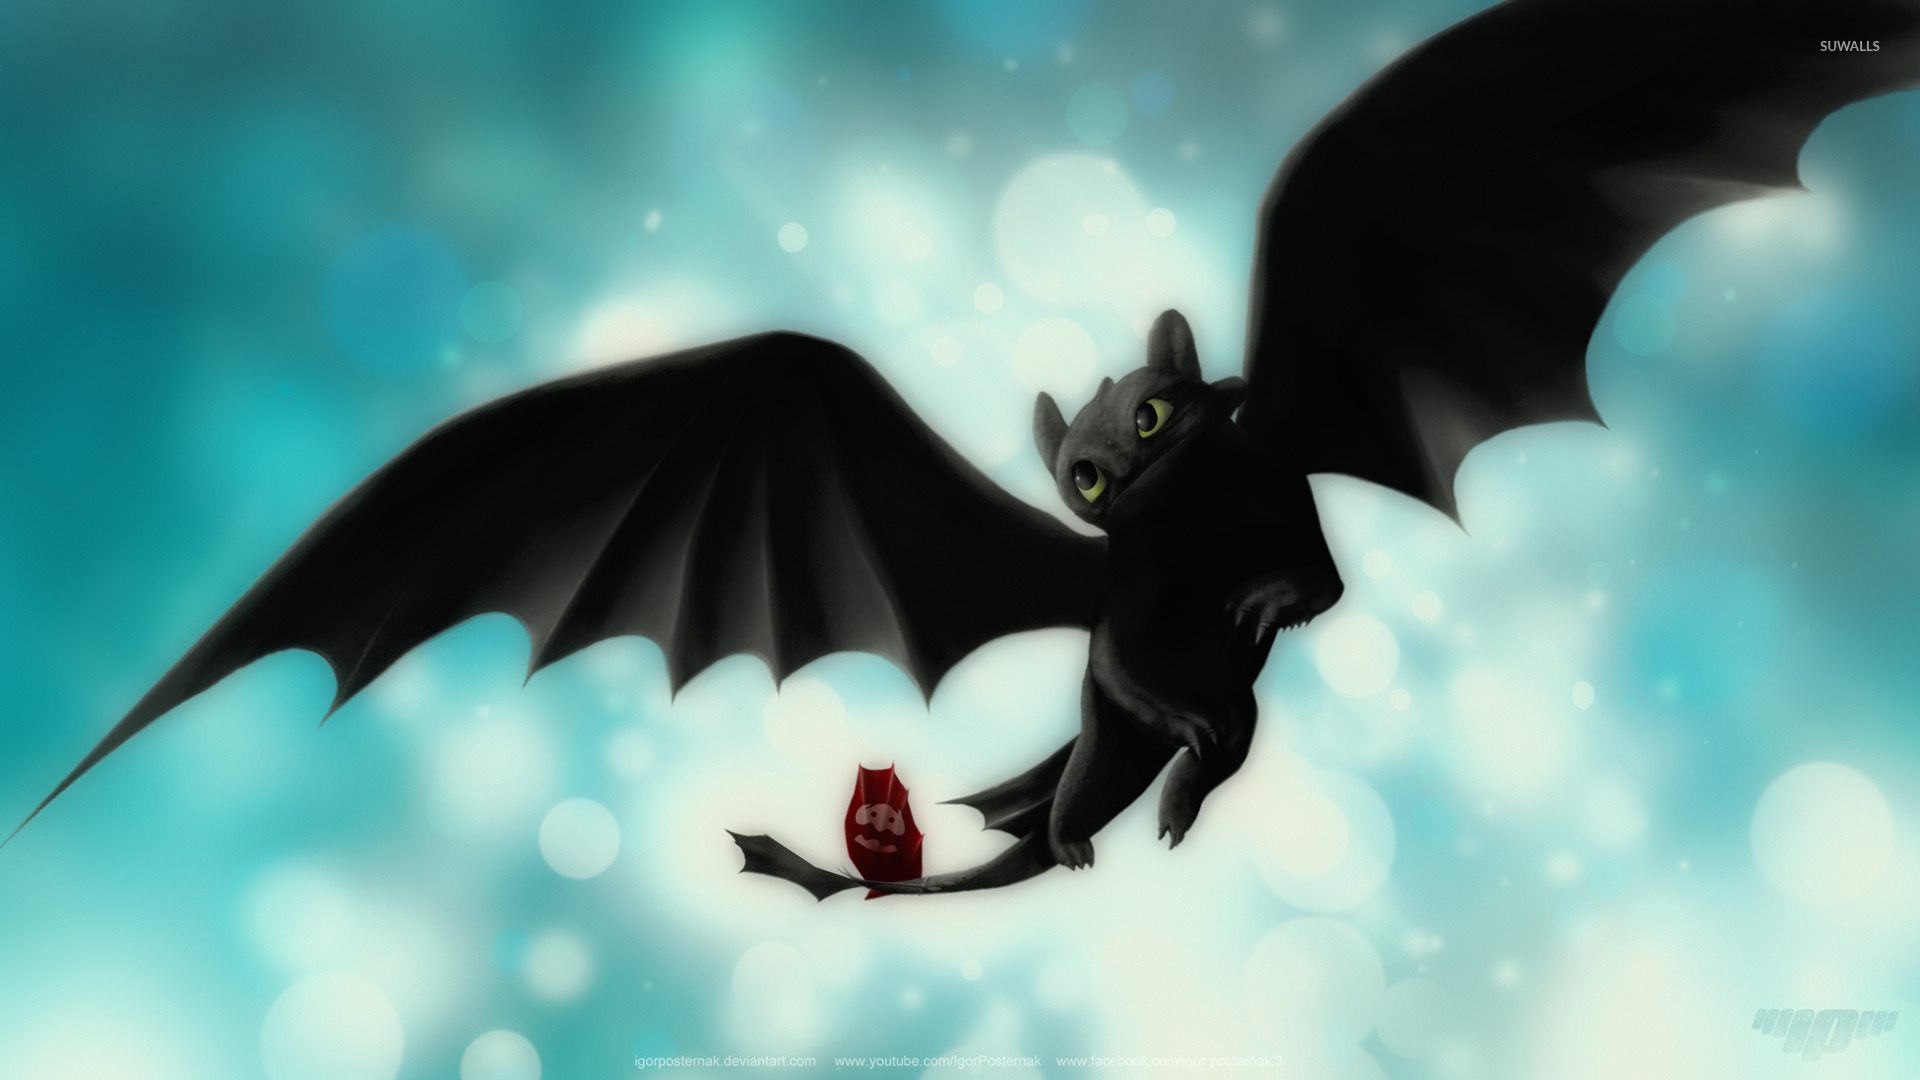 Toothless  How to Train Your Dragon wallpaper  Cartoon wallpapers  22782